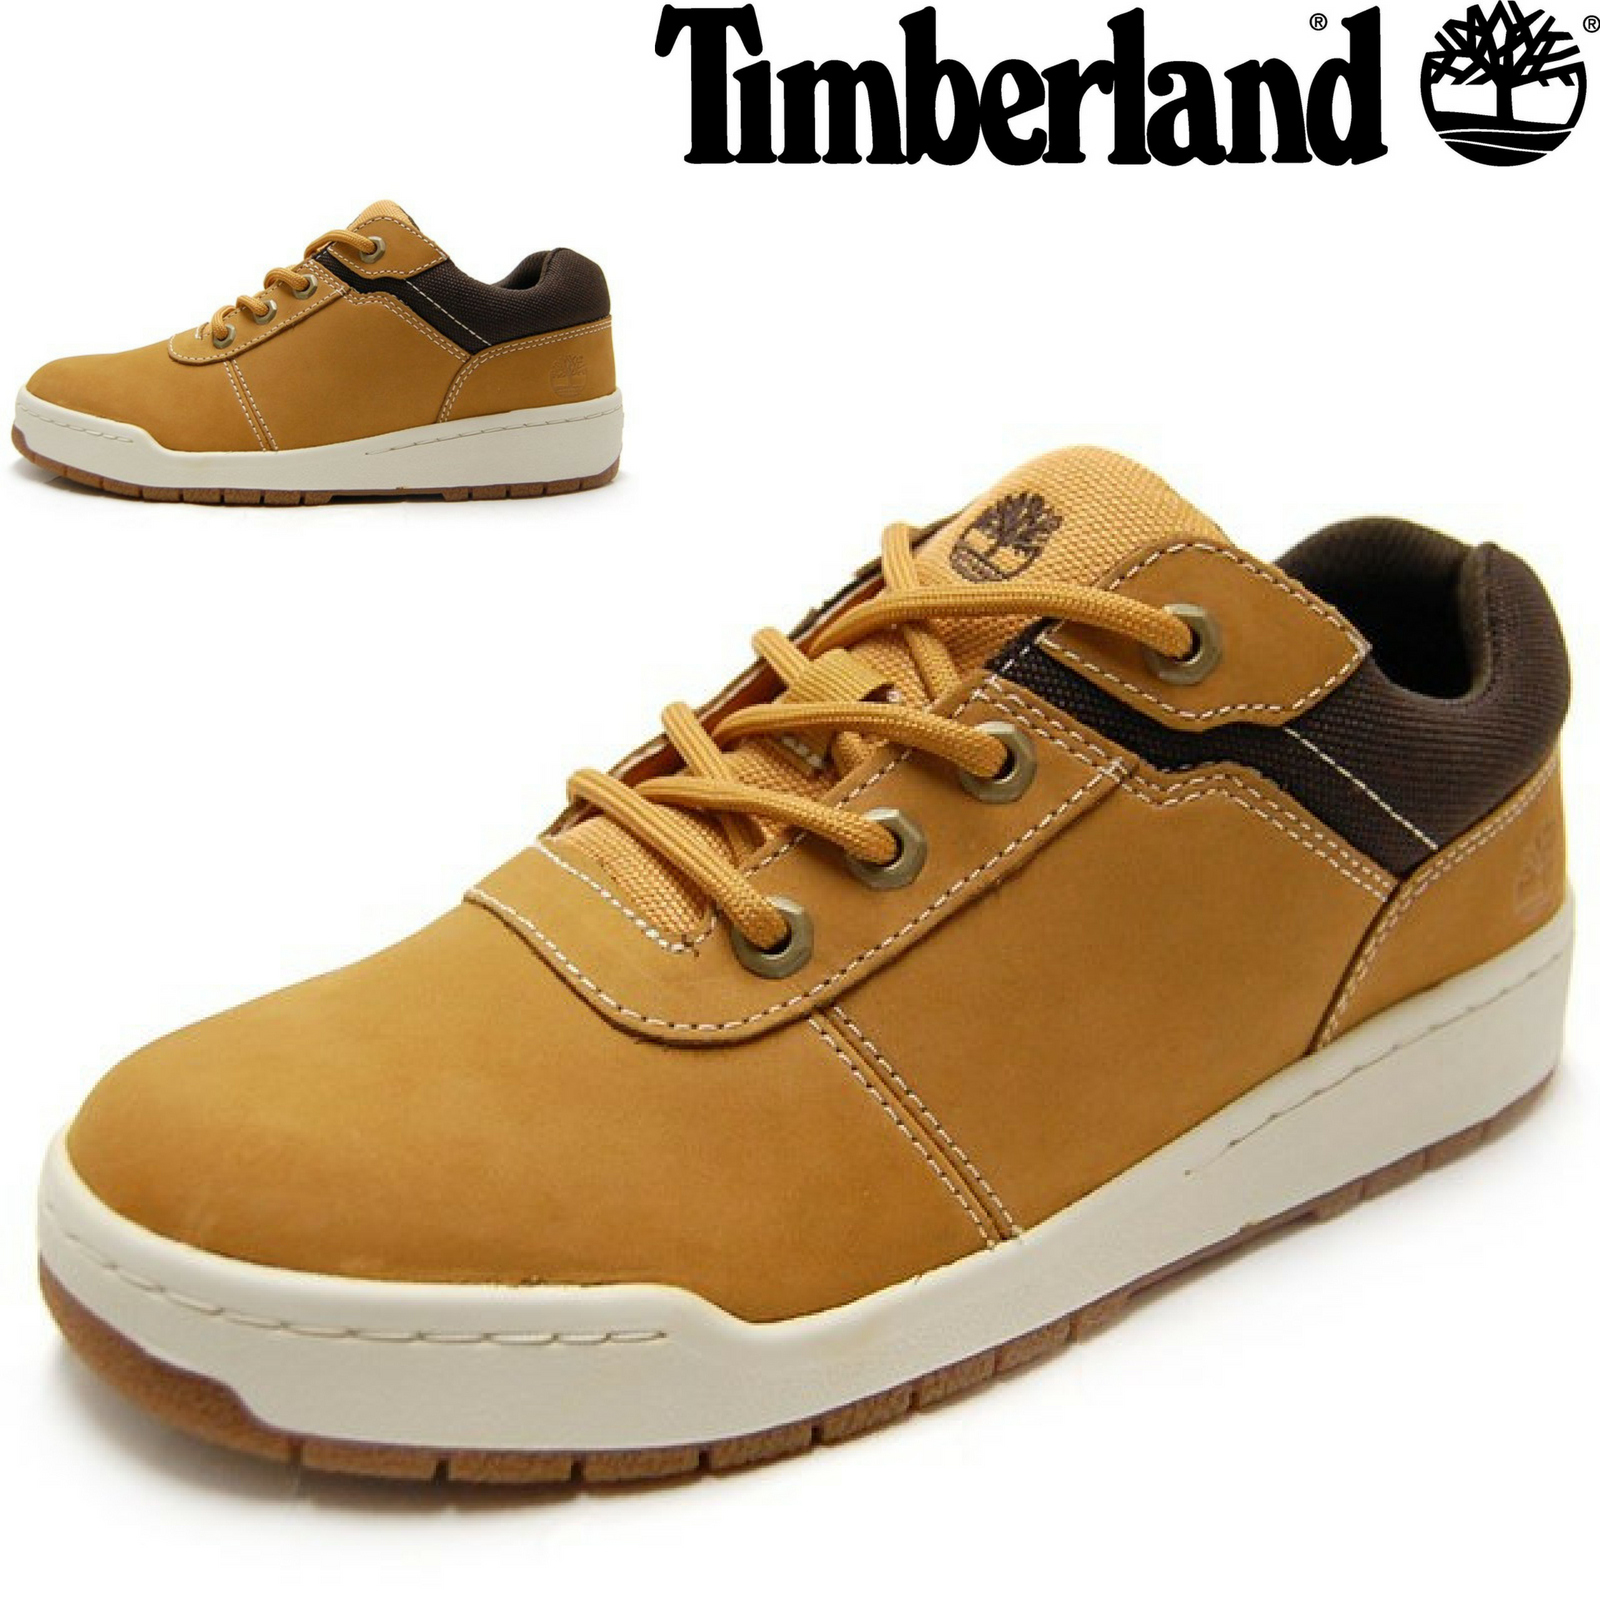 timberland men's raystown boots